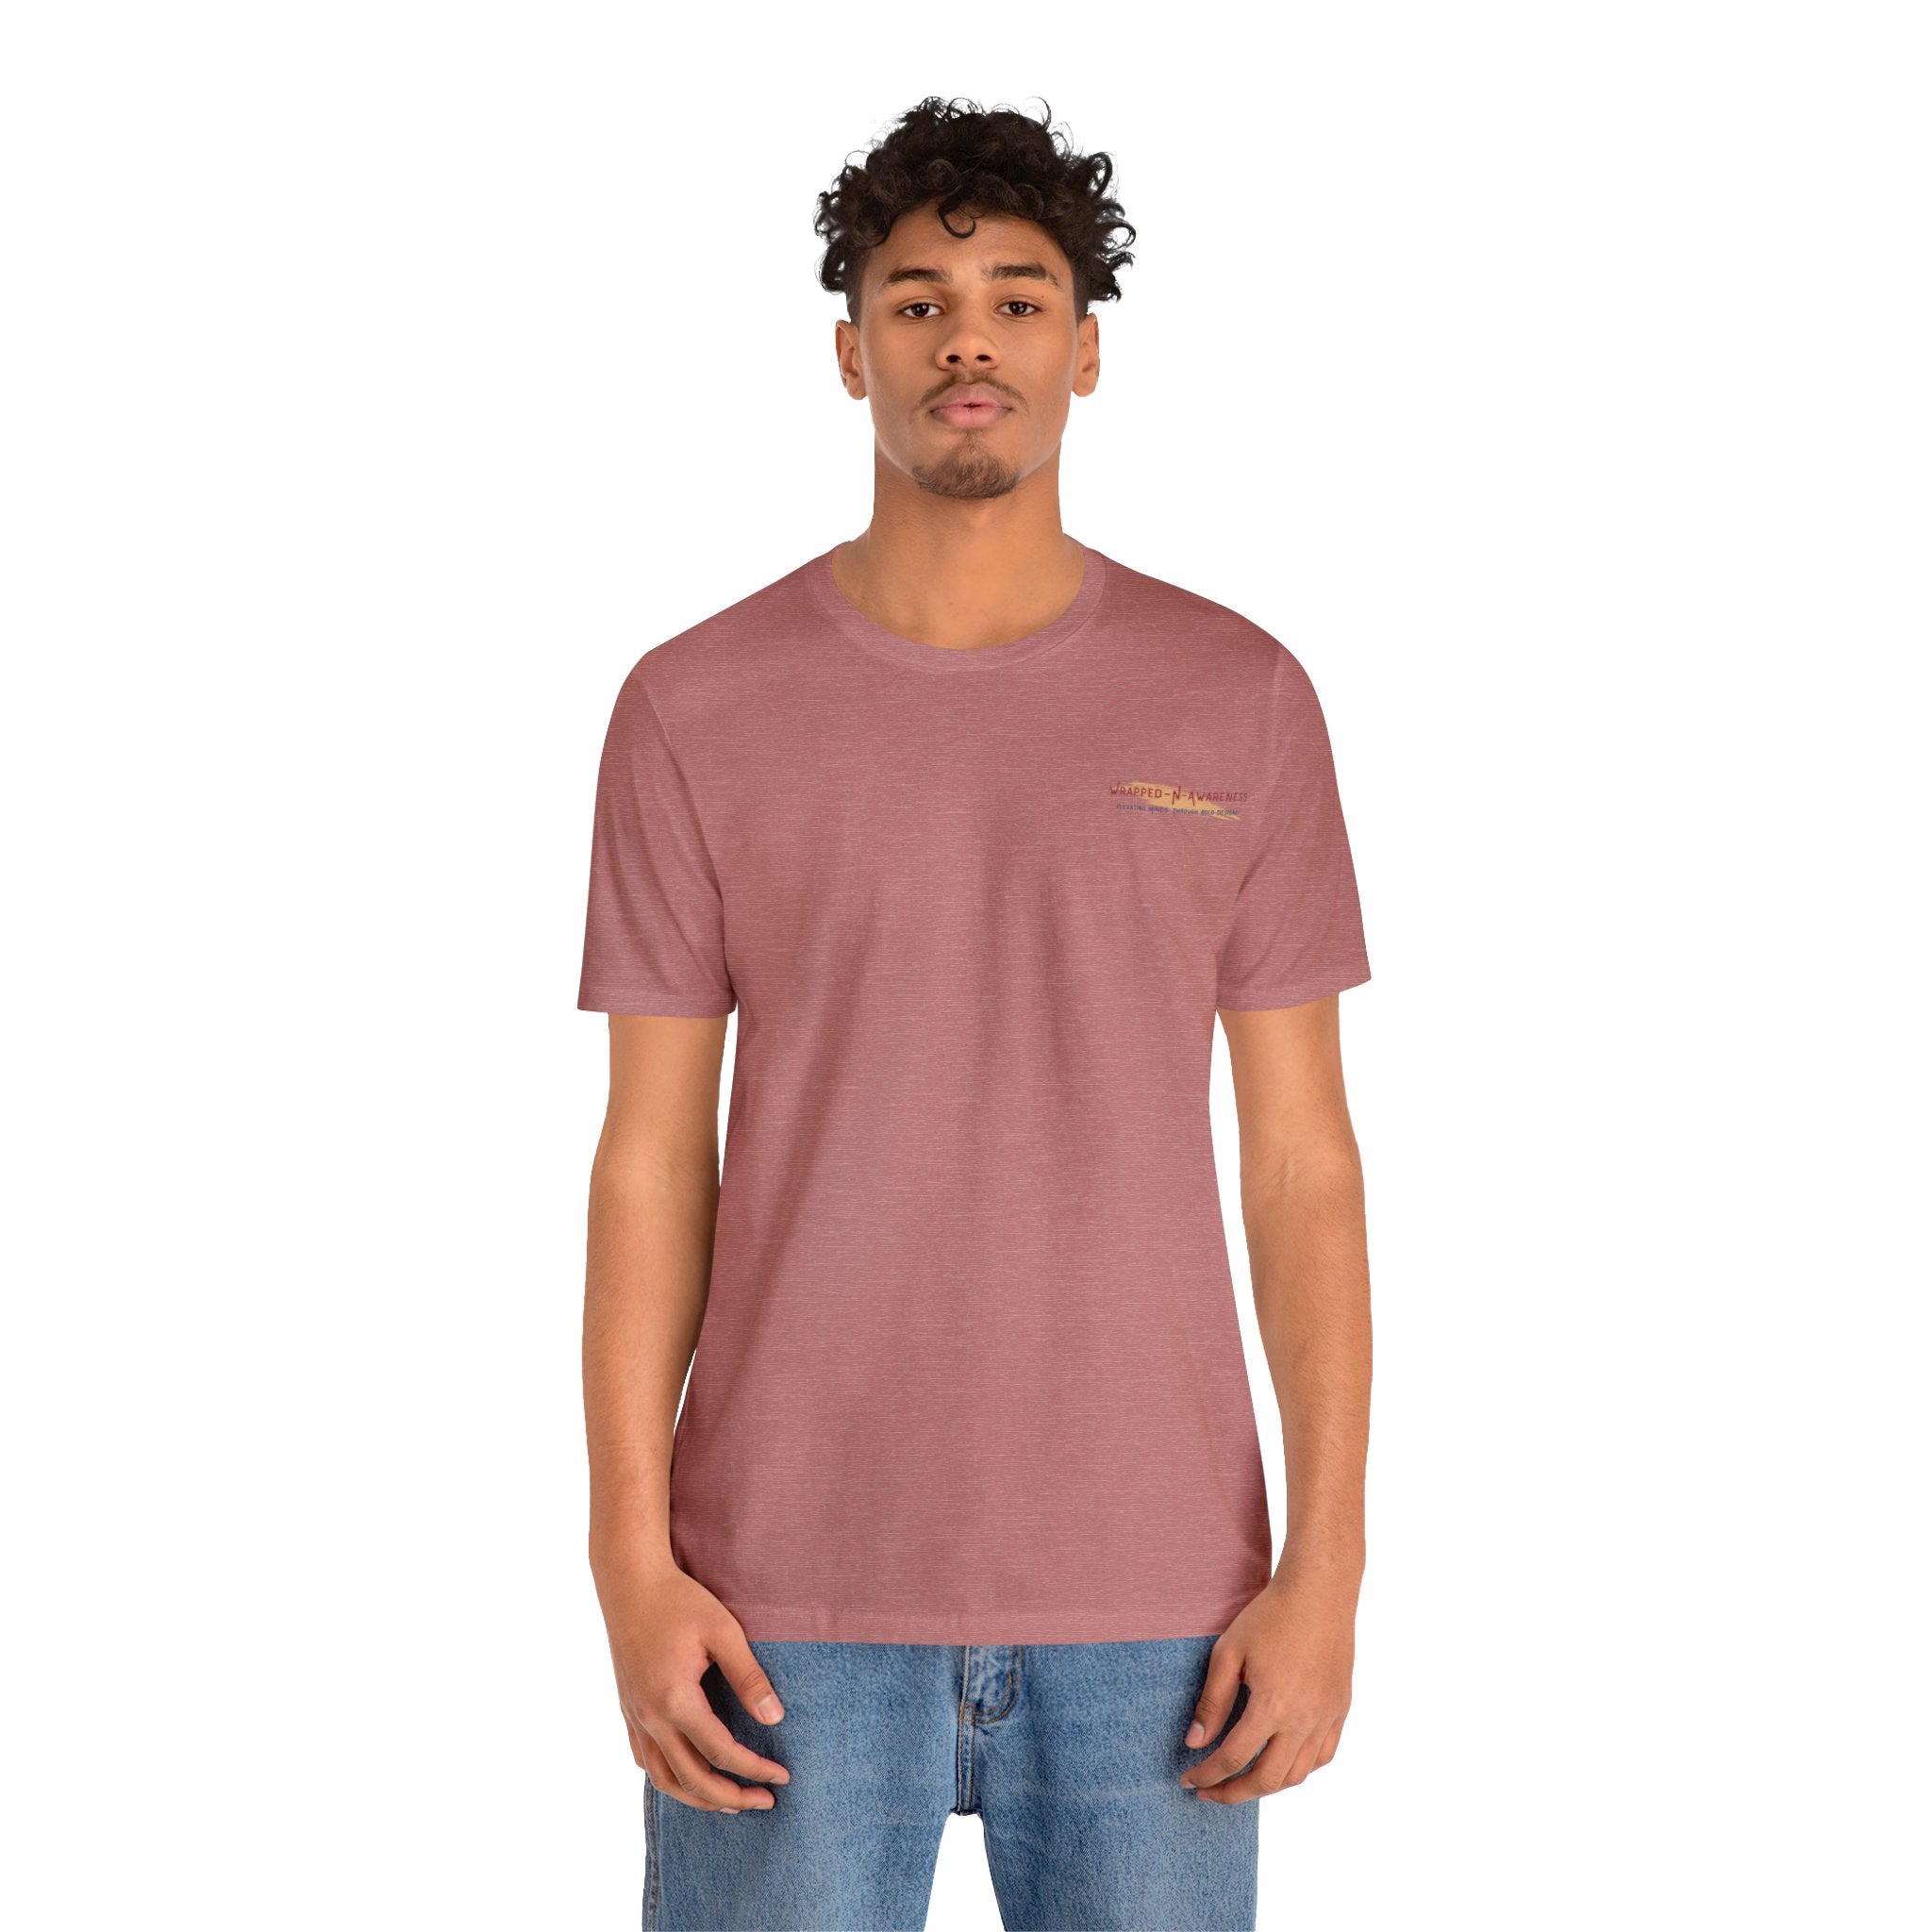 Release Your Mind Jersey Tee - Bella+Canvas 3001 Heather Mauve Airlume Cotton Bella+Canvas 3001 Crew Neckline Jersey Short Sleeve Lightweight Fabric Mental Health Support Retail Fit Tear-away Label Tee Unisex Tee T-Shirt 11847836524831878322_2048 Printify